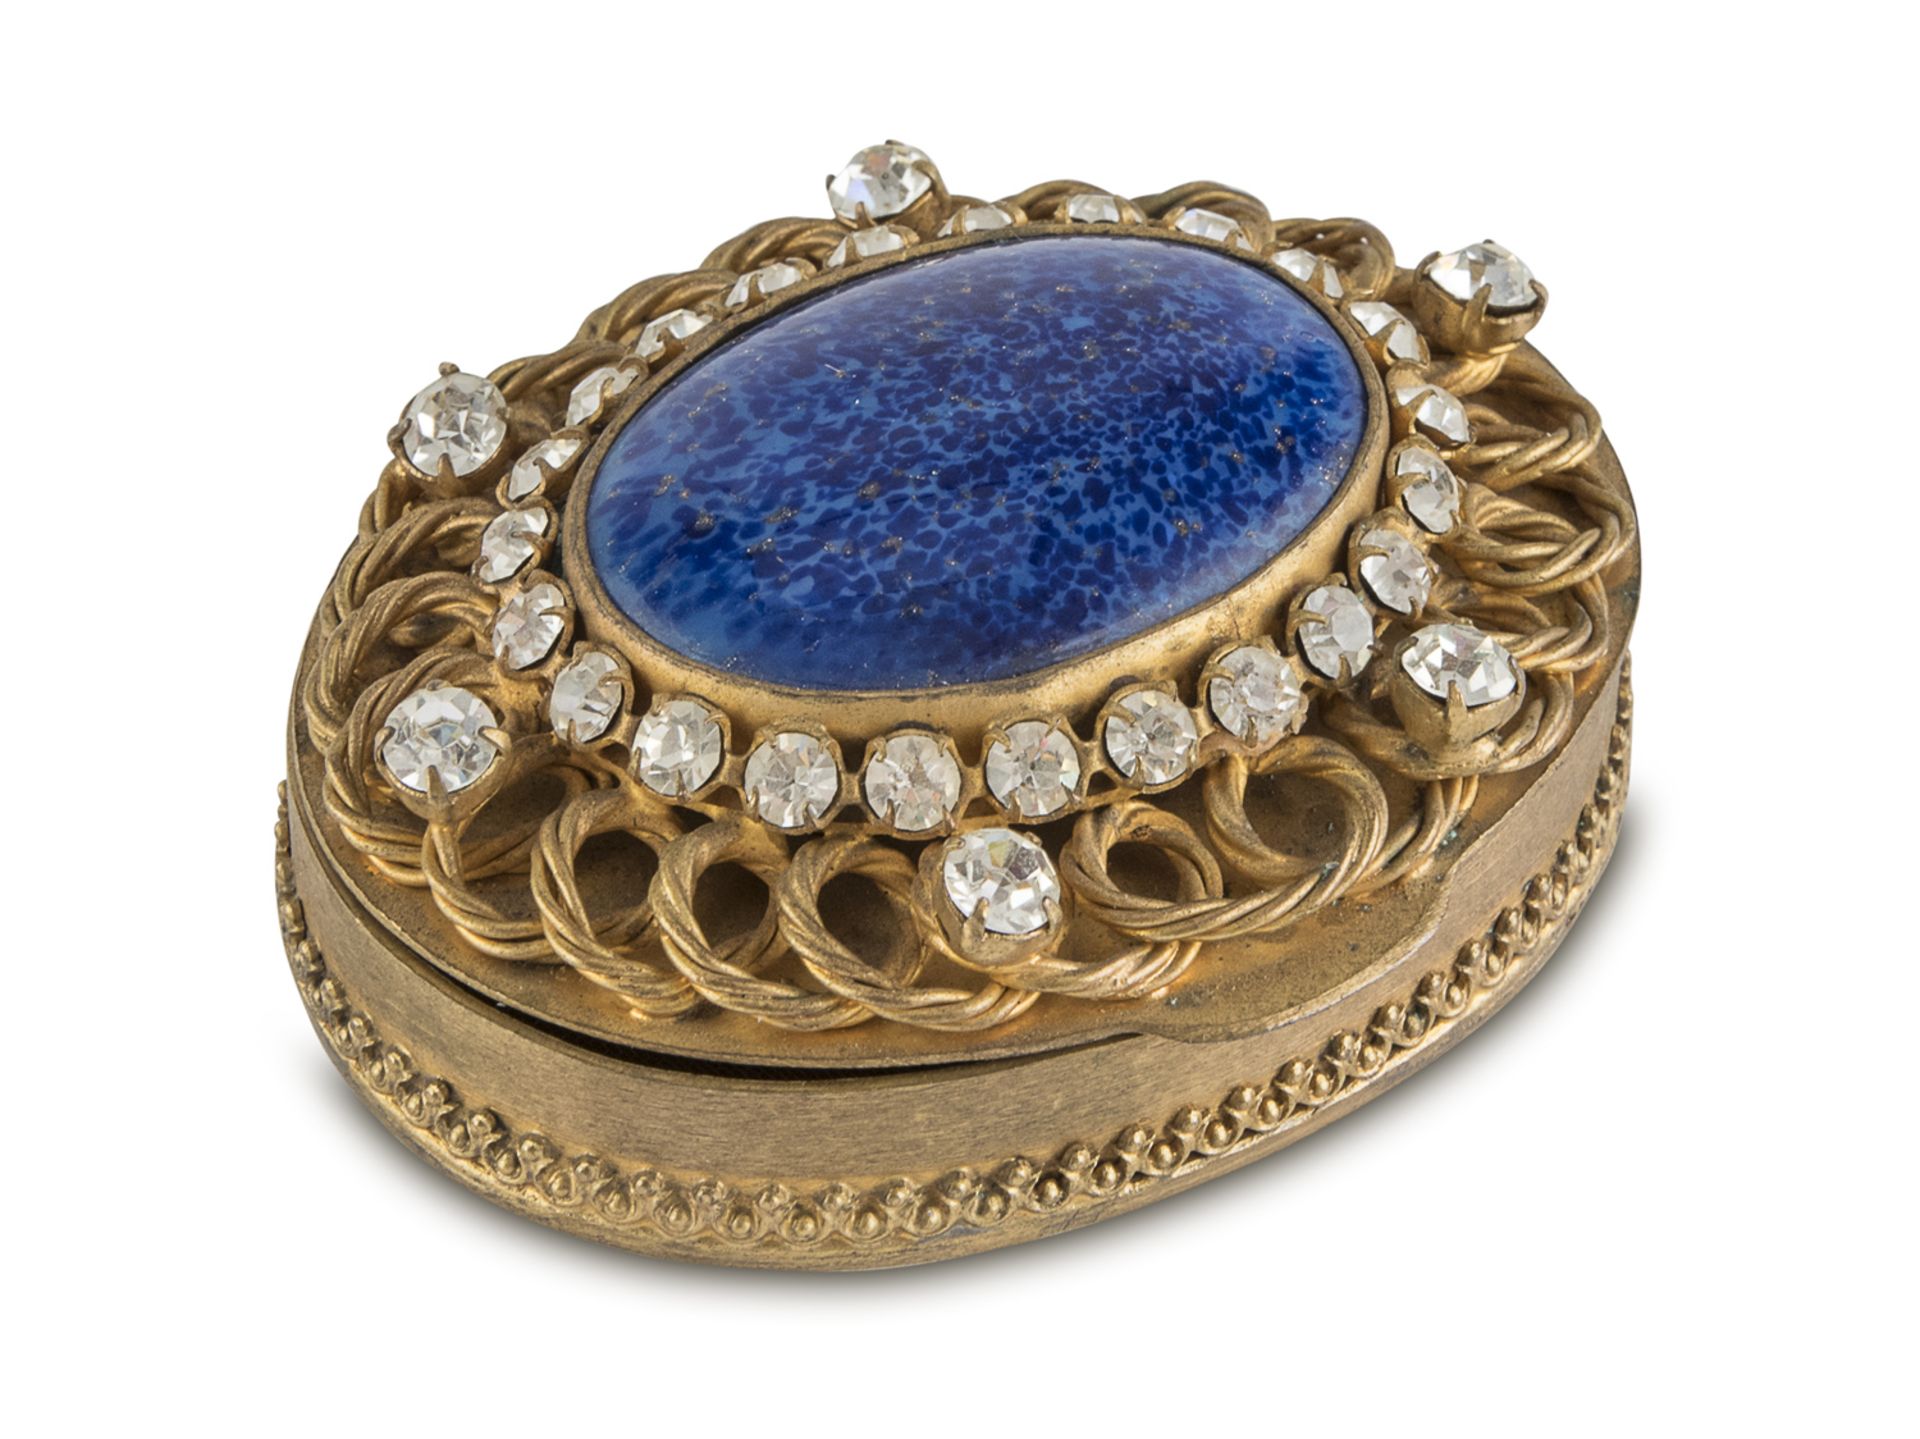 GILDED METAL TROUSSE WITH LAPIS LAZULI FROM THE 1950s